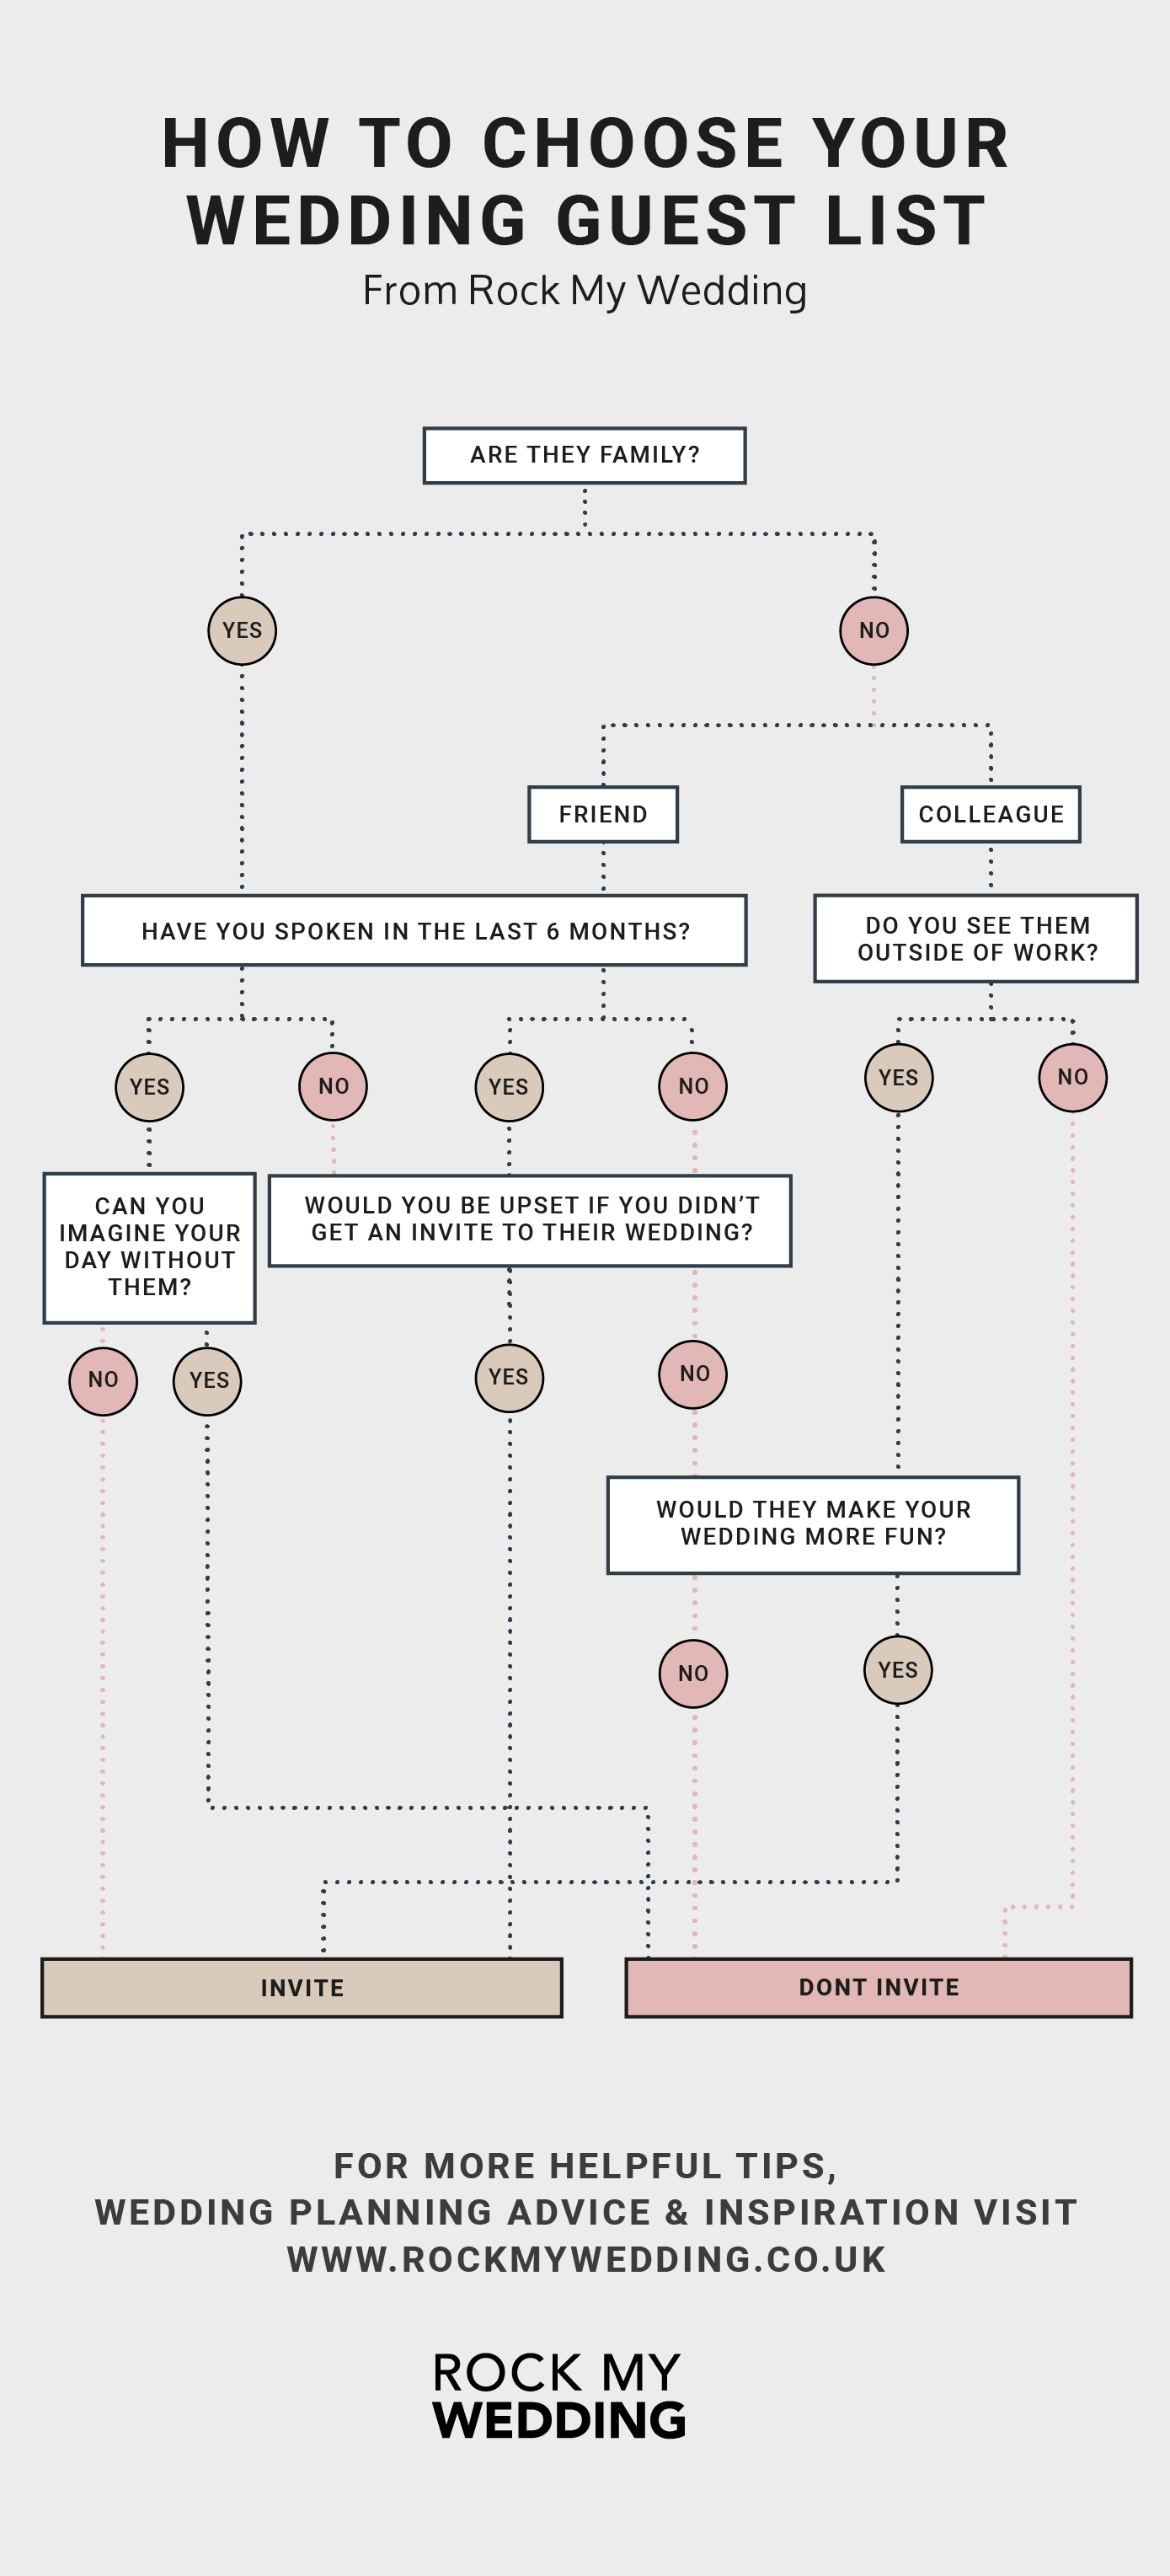 HOW TO CHOOSE YOUR WEDDING GUEST LIST_OCT_2020-01.png